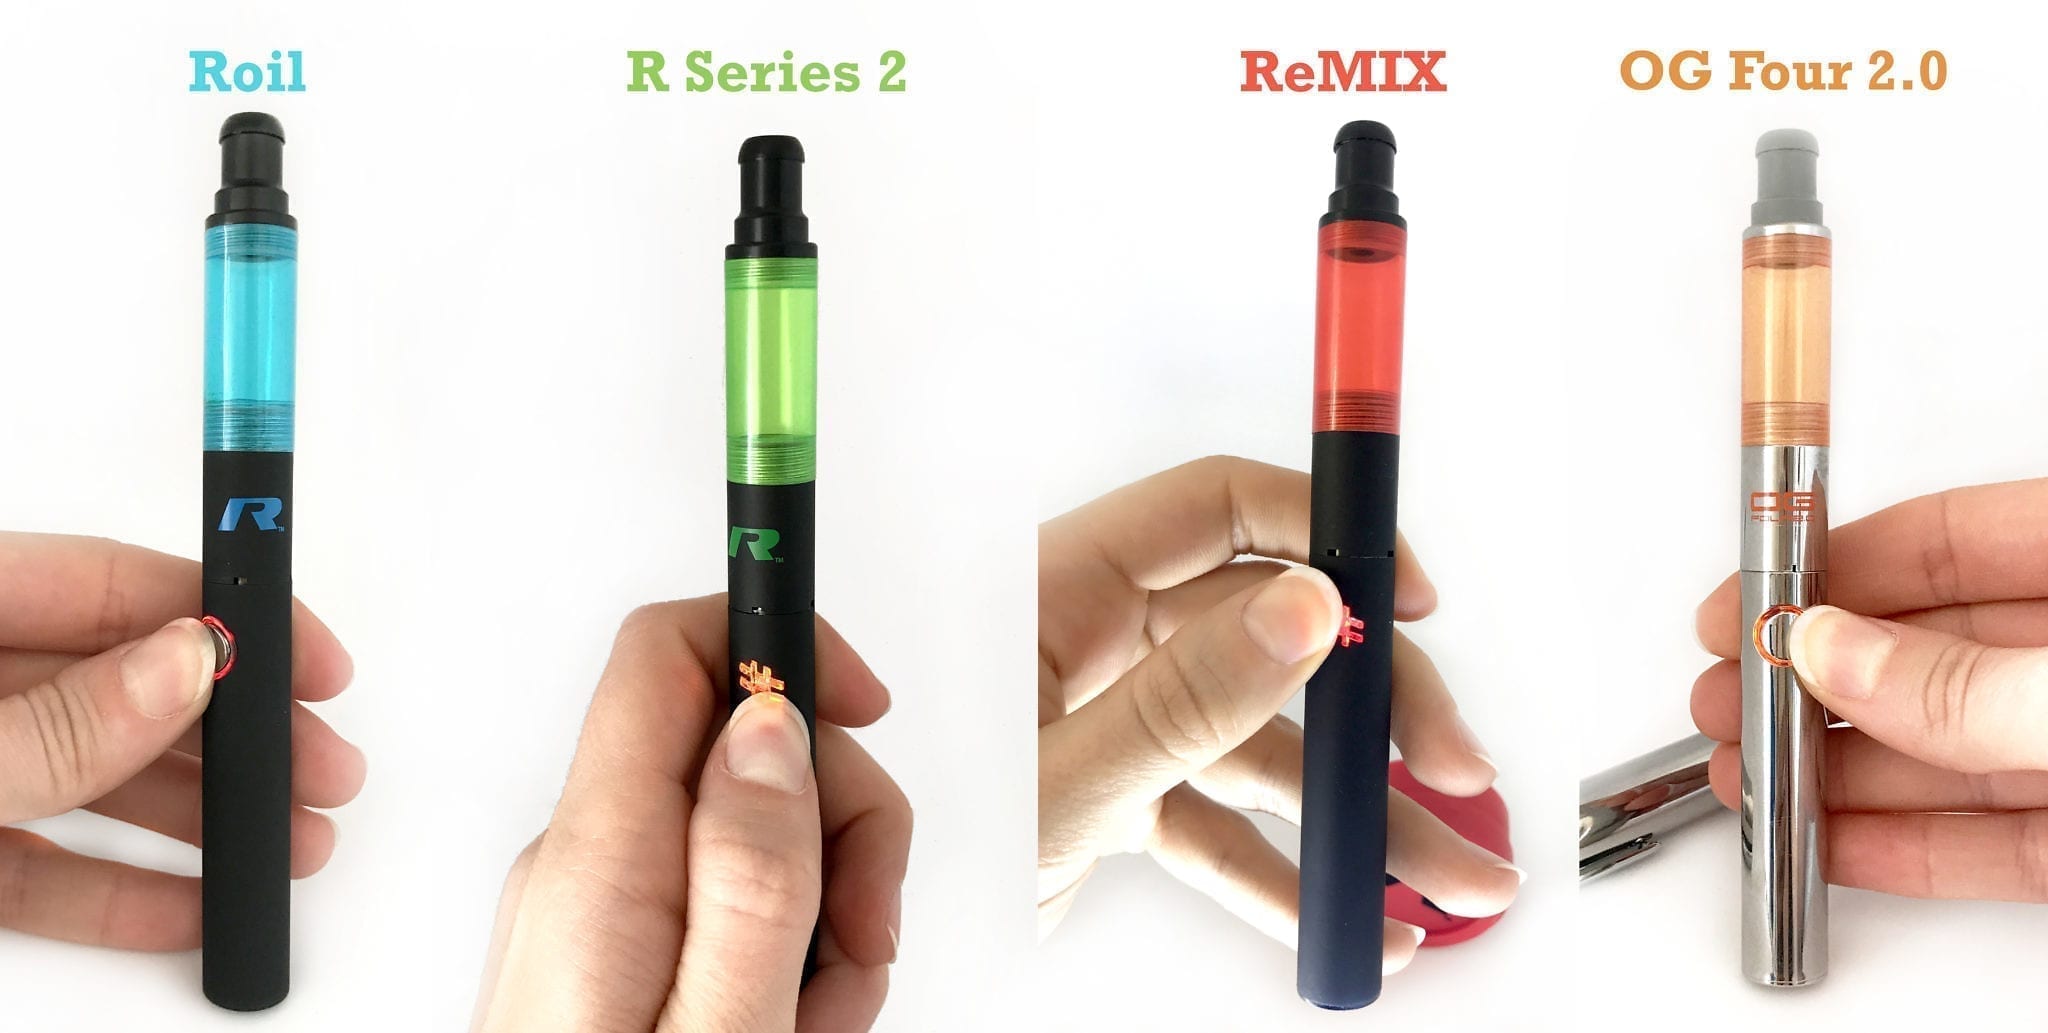 This Thing Rips Vape Pens - Roil - R Series 2 - ReMIX - OG Four 2.0